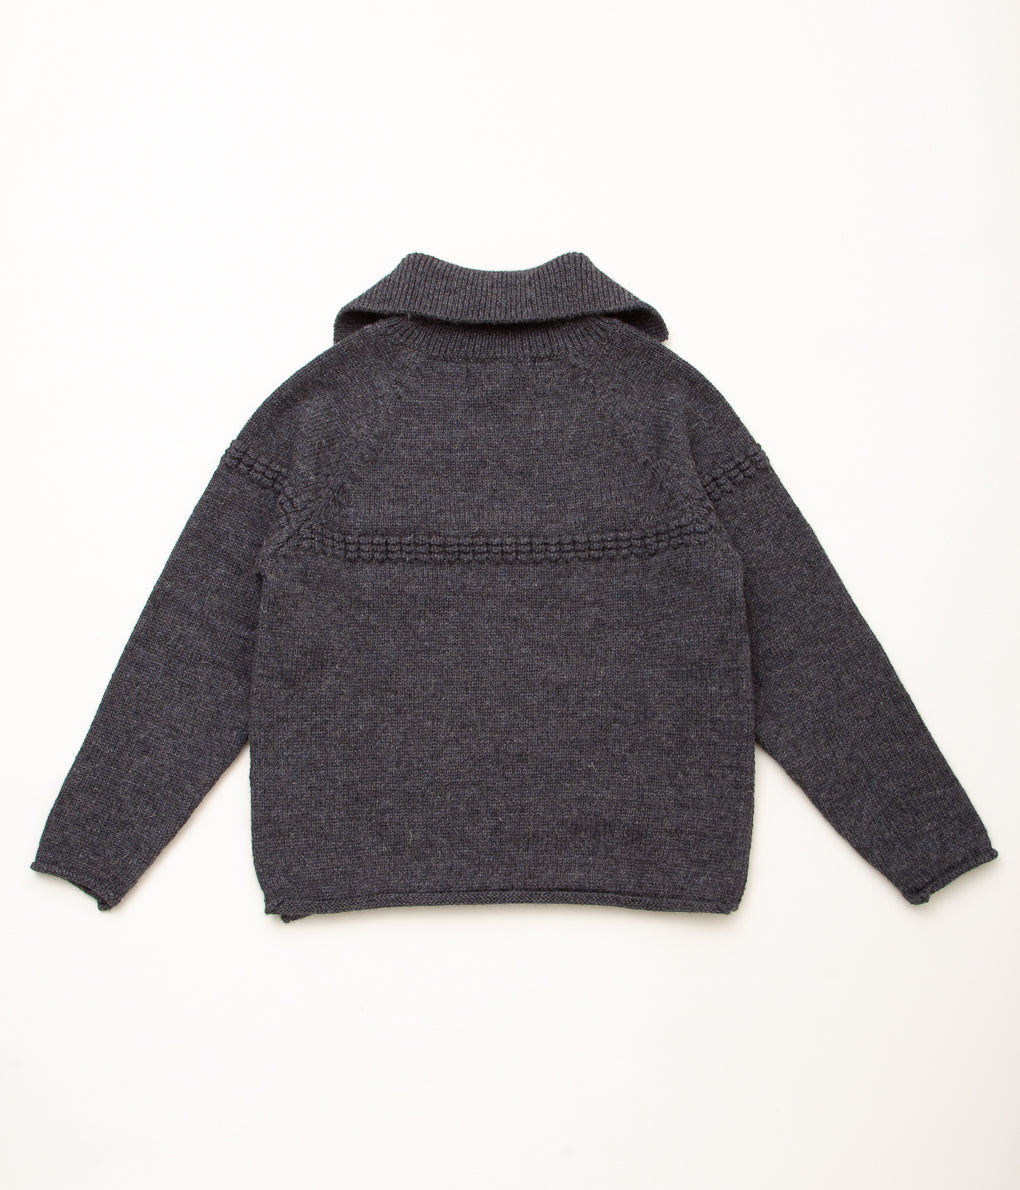 XENIA TELUNTS "SAILOR'S NECK SWEATER"(CHARCOAL)